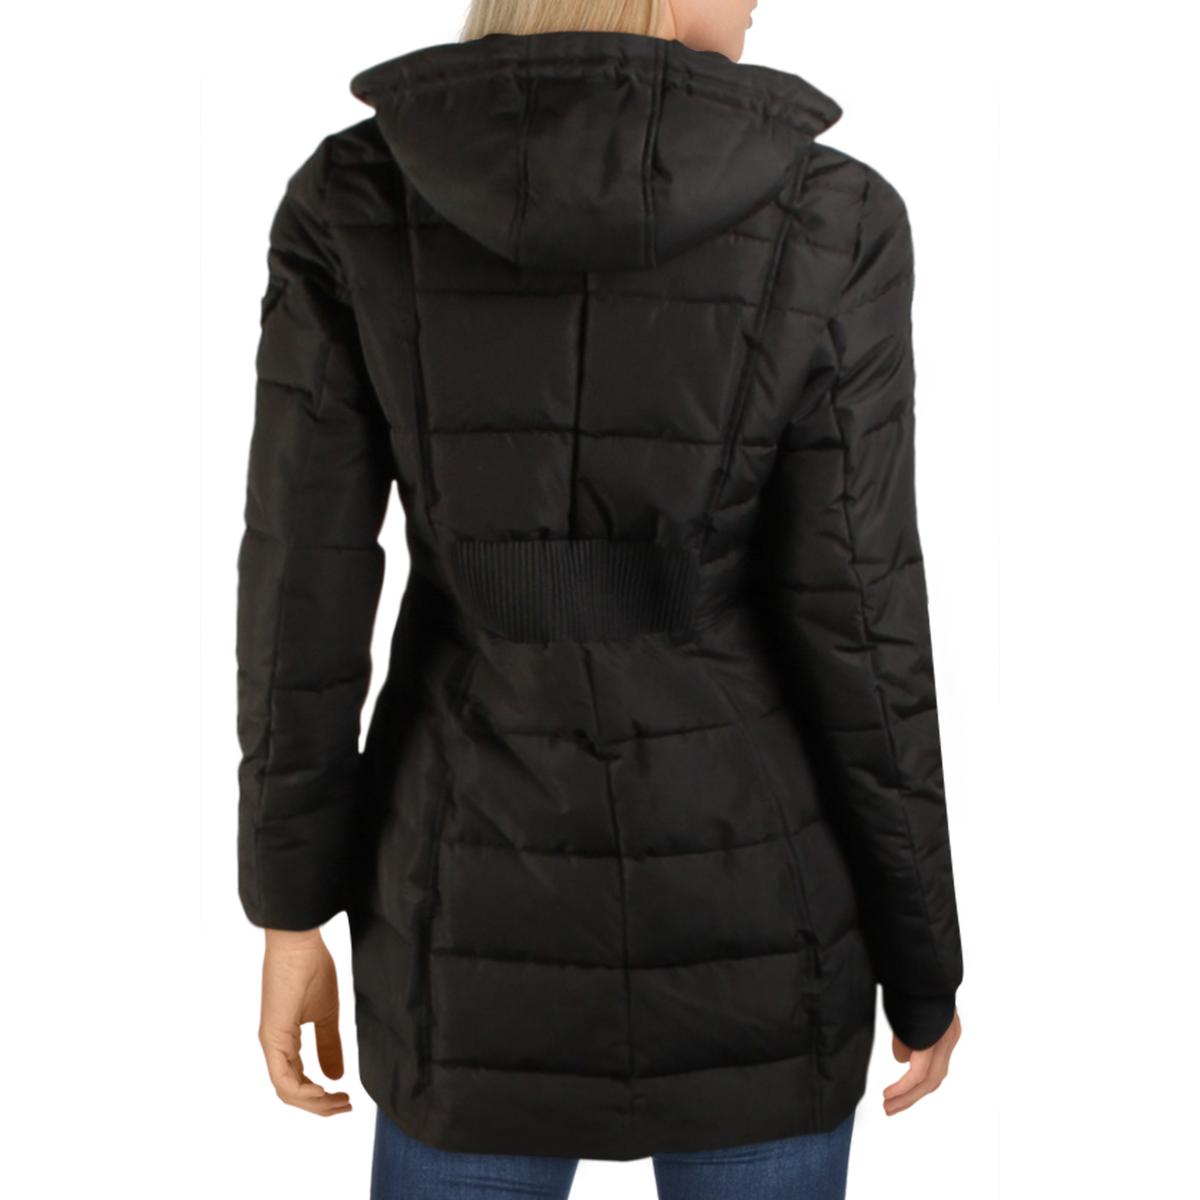 Nautica Womens Black Winter Quilted Hooded Parka Coat Outerwear S BHFO ...